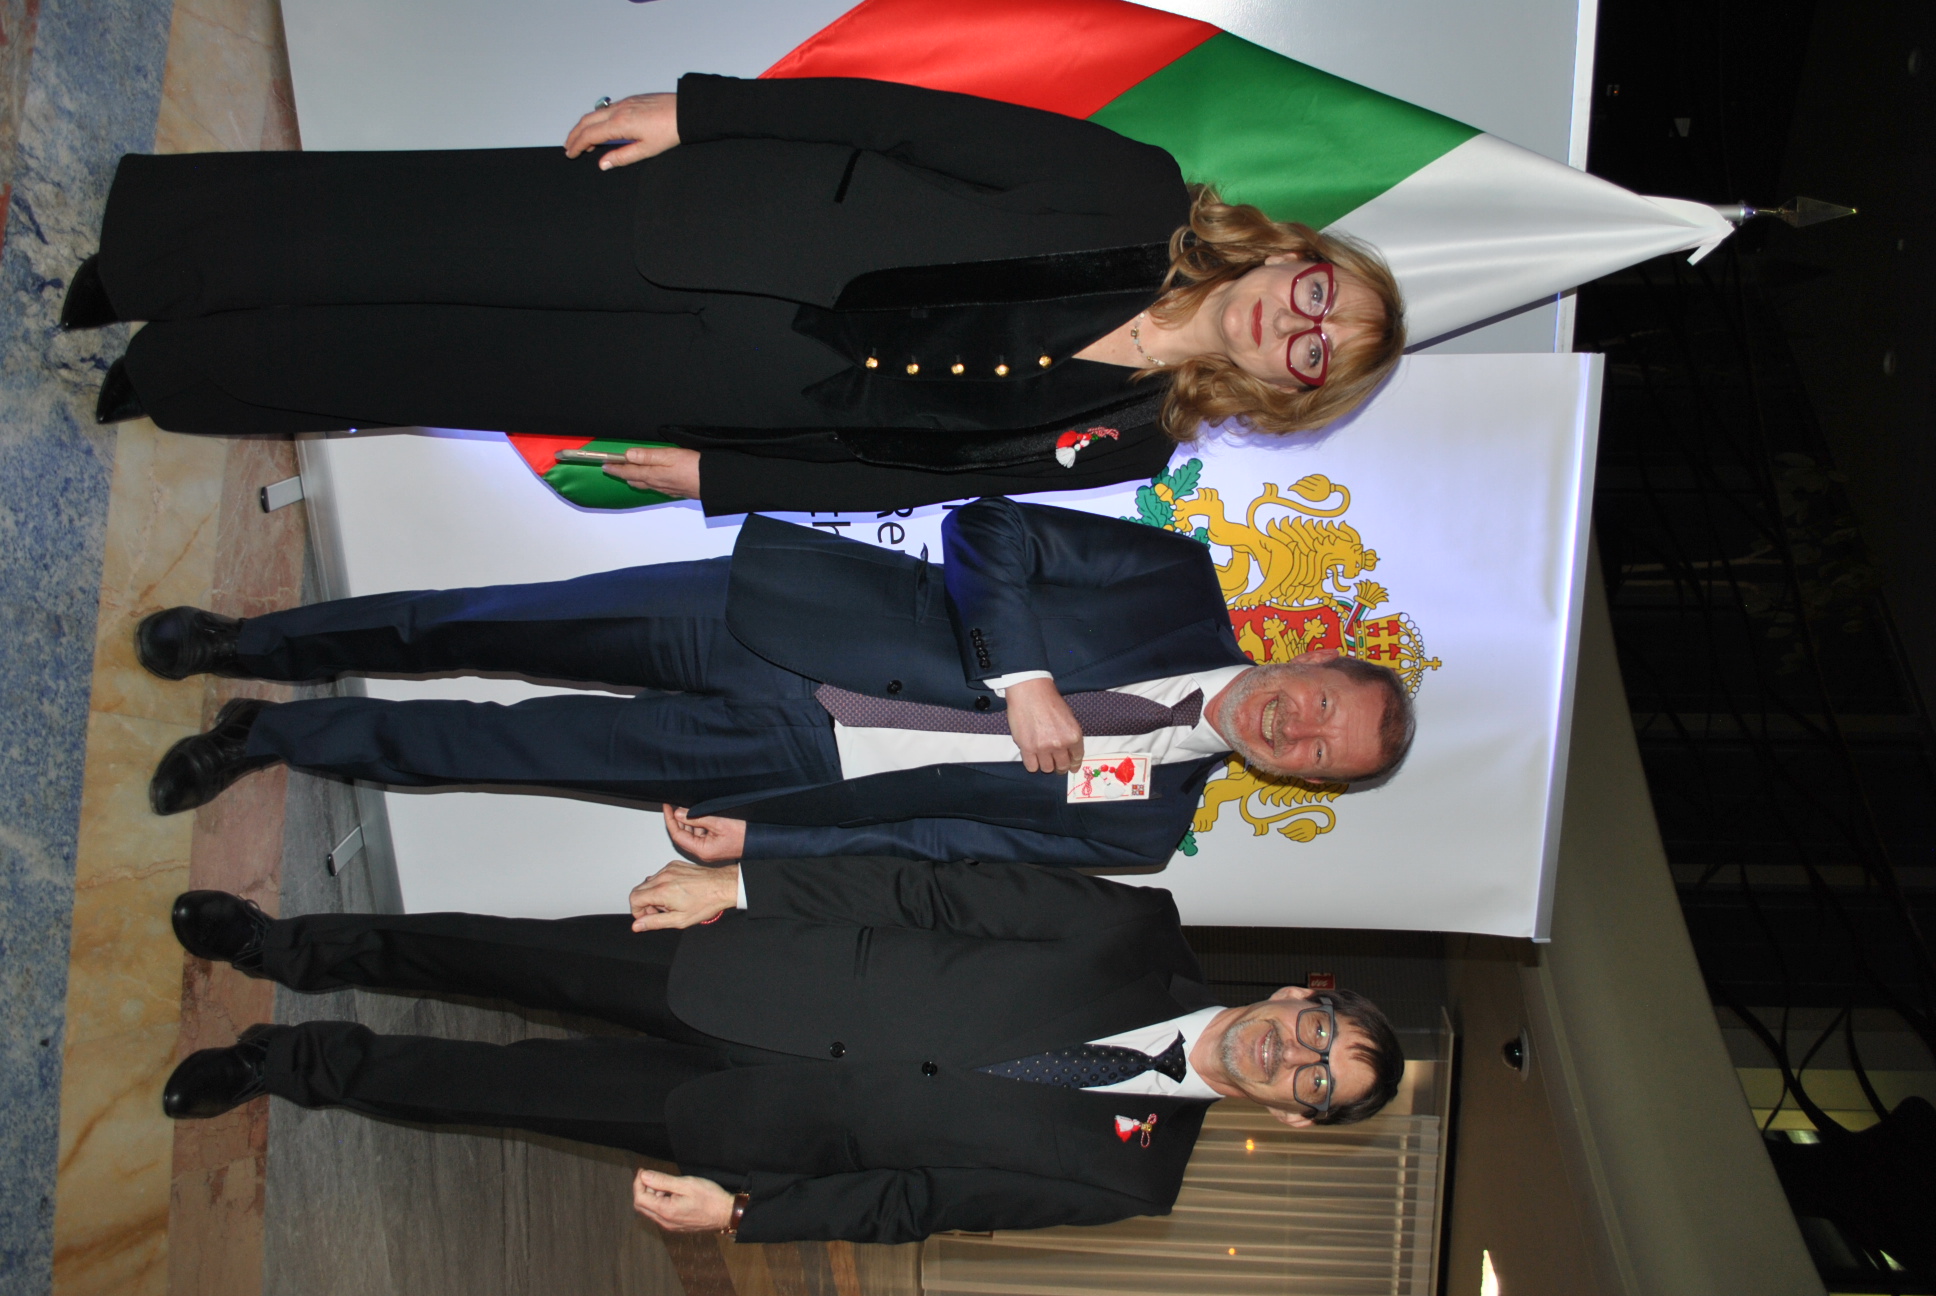 Celebration of Bulgaria’s National Day in the premises of the World Intellectual Property Organisation /WIPO/